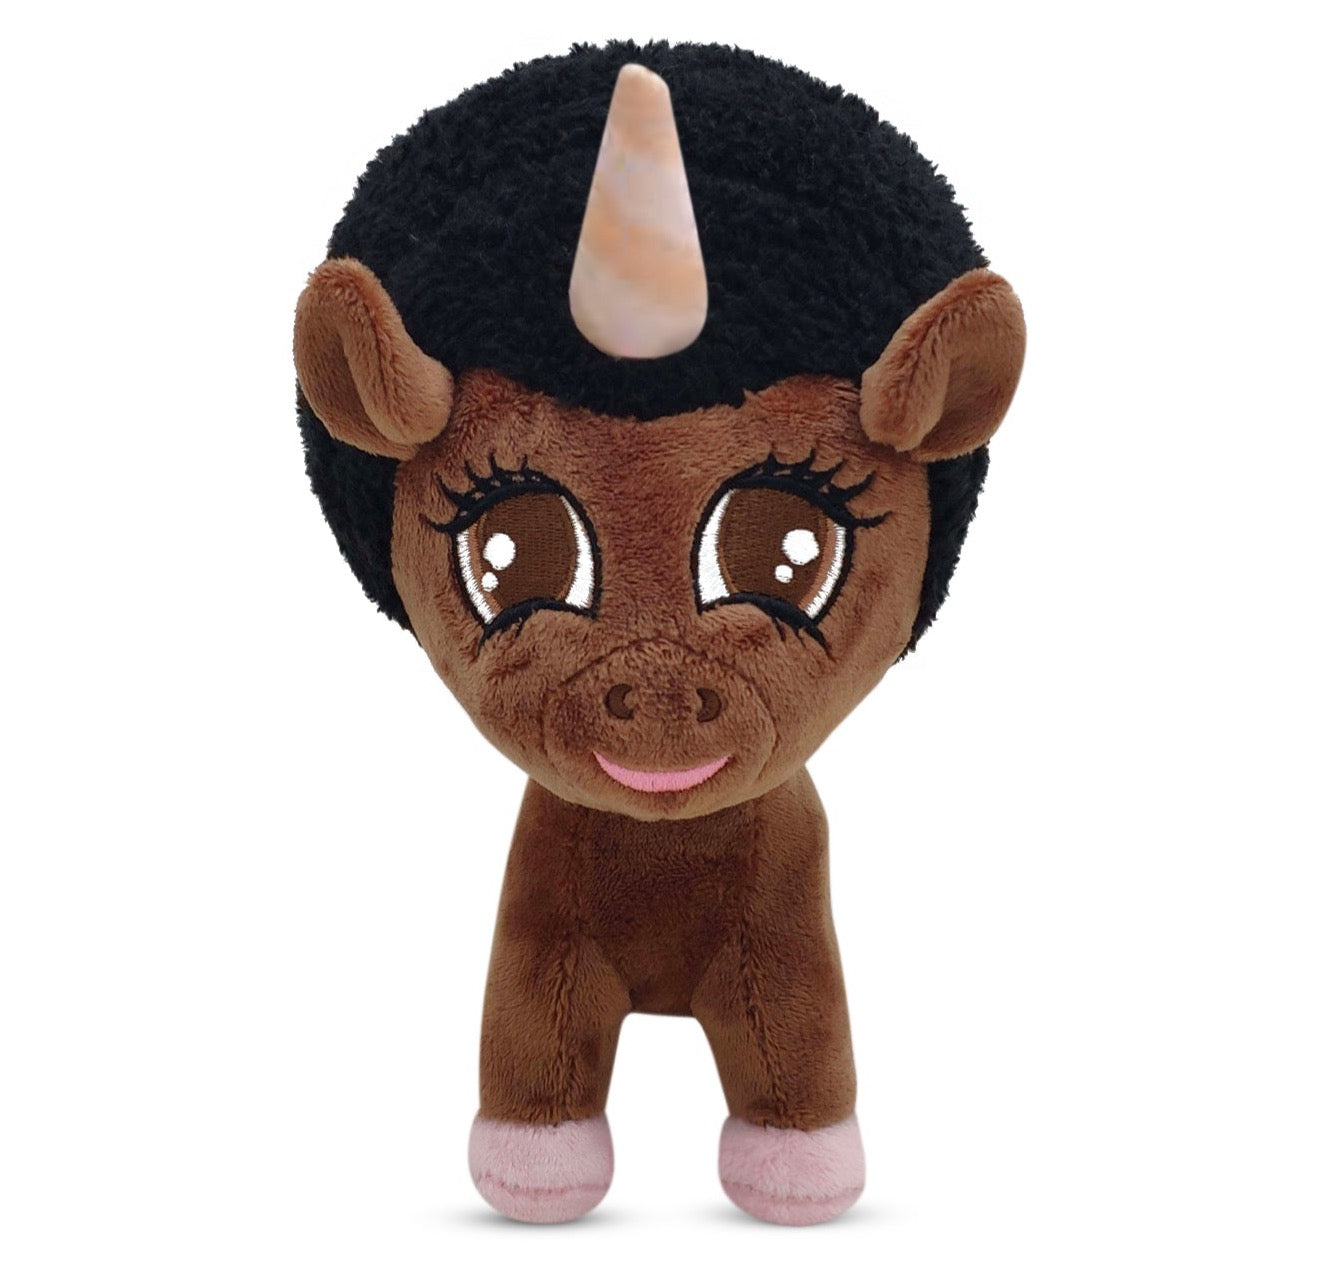 Load image into Gallery viewer, Baby Simone, Unicorn Plush Toy with Afro - Standing 8 inch
